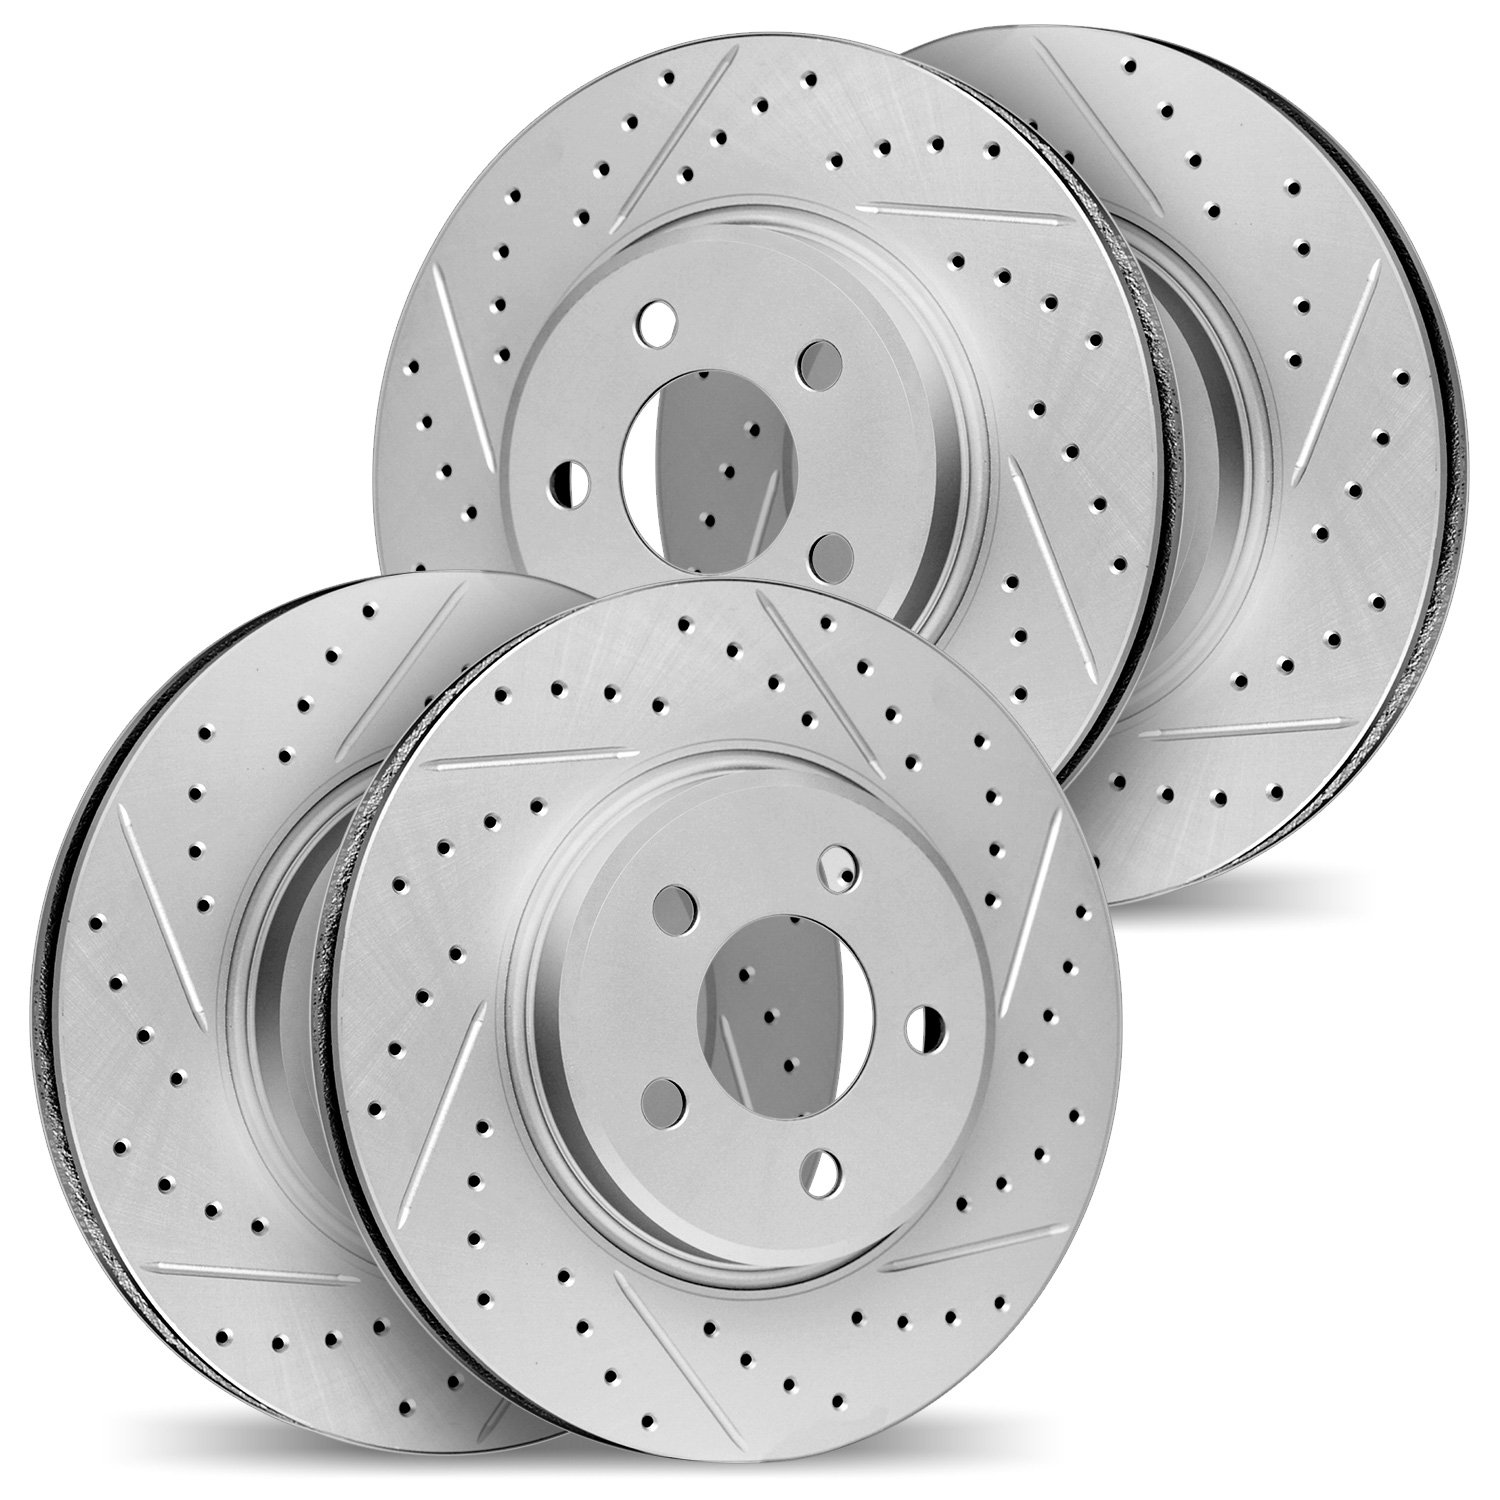 2004-63018 Geoperformance Drilled/Slotted Brake Rotors, Fits Select Mercedes-Benz, Position: Front and Rear